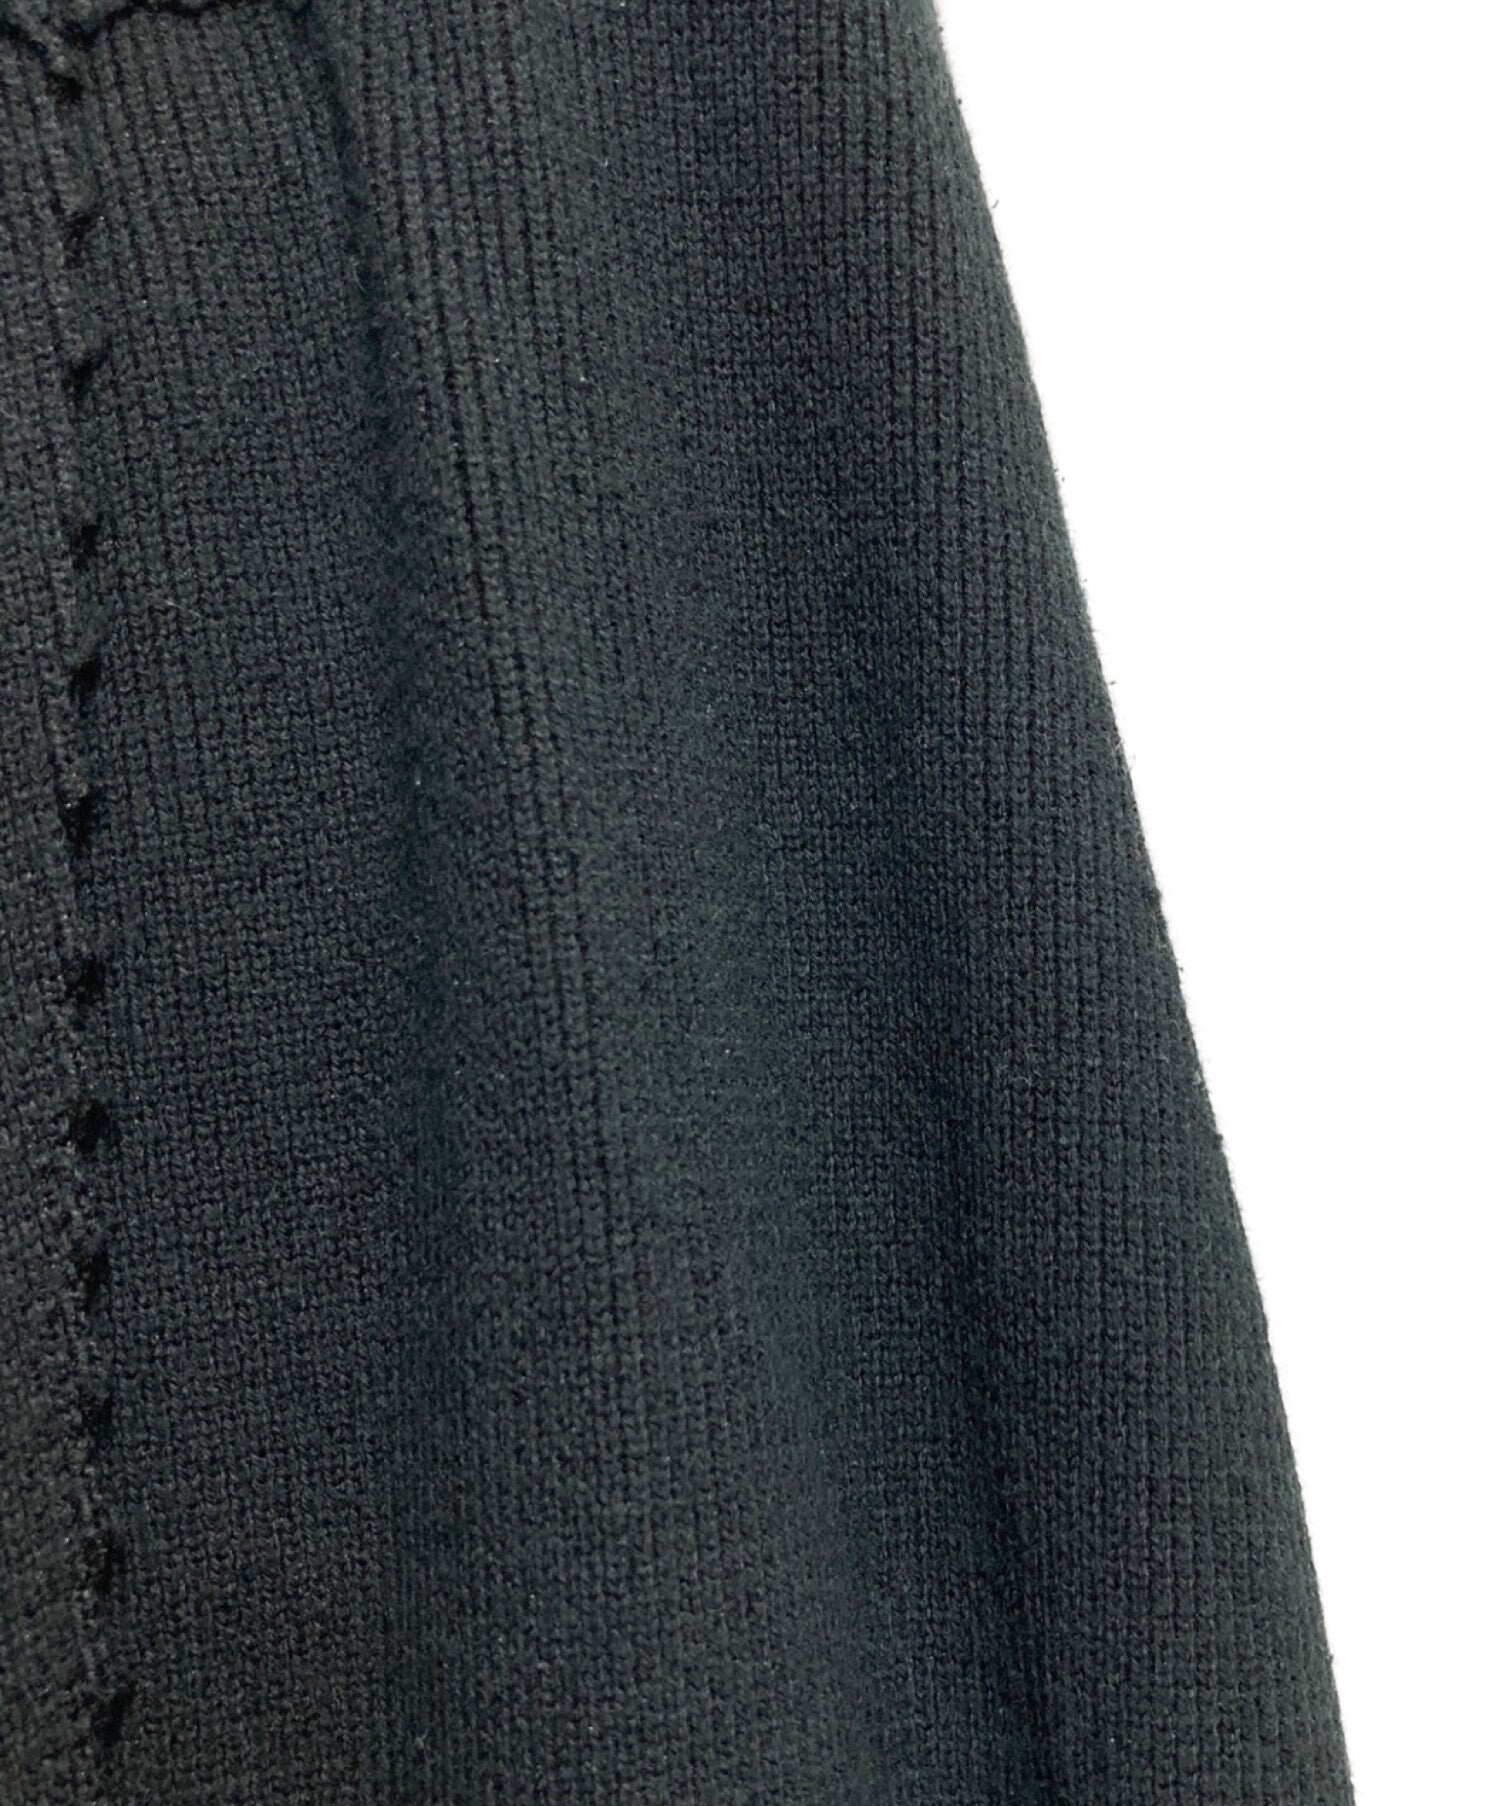 A-POC ABLE ISSEY MIYAKE Knit sarouel pants IM93KF312 | Archive Factory